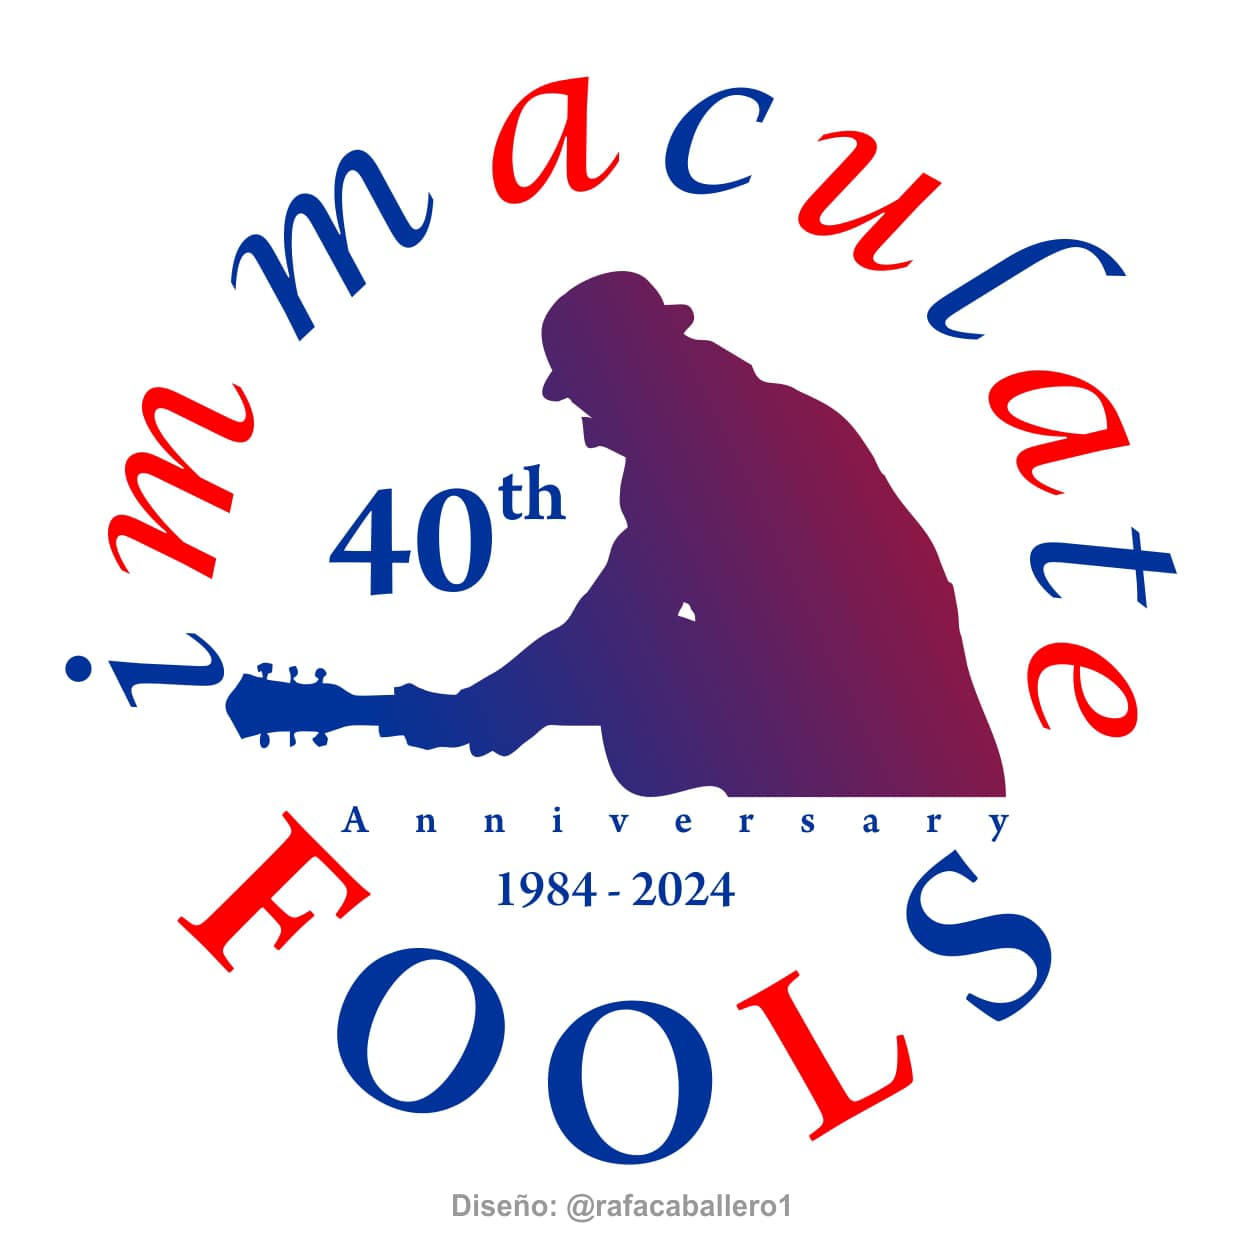 blue and red graphic of man wearing hat and playing guitar with text around in a circular pattern